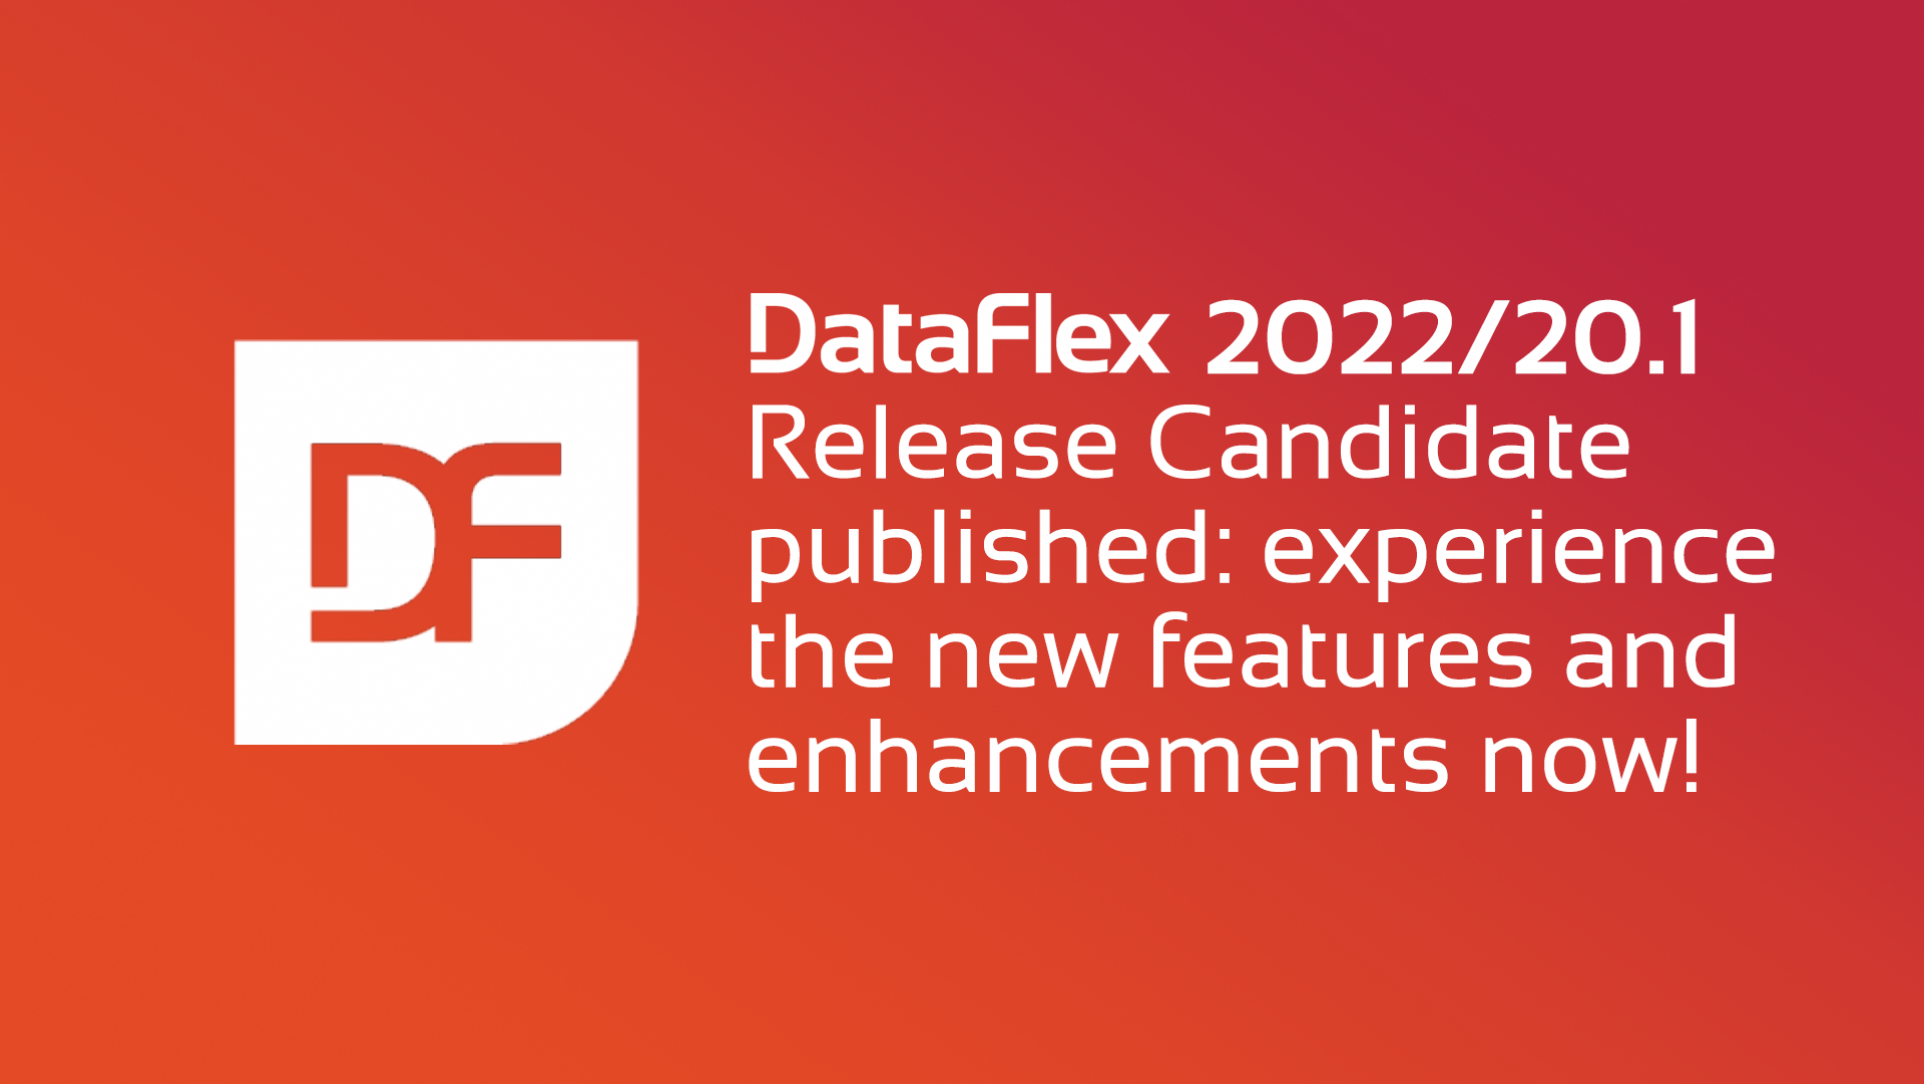 DataFlex 2022 Release Candidate posted